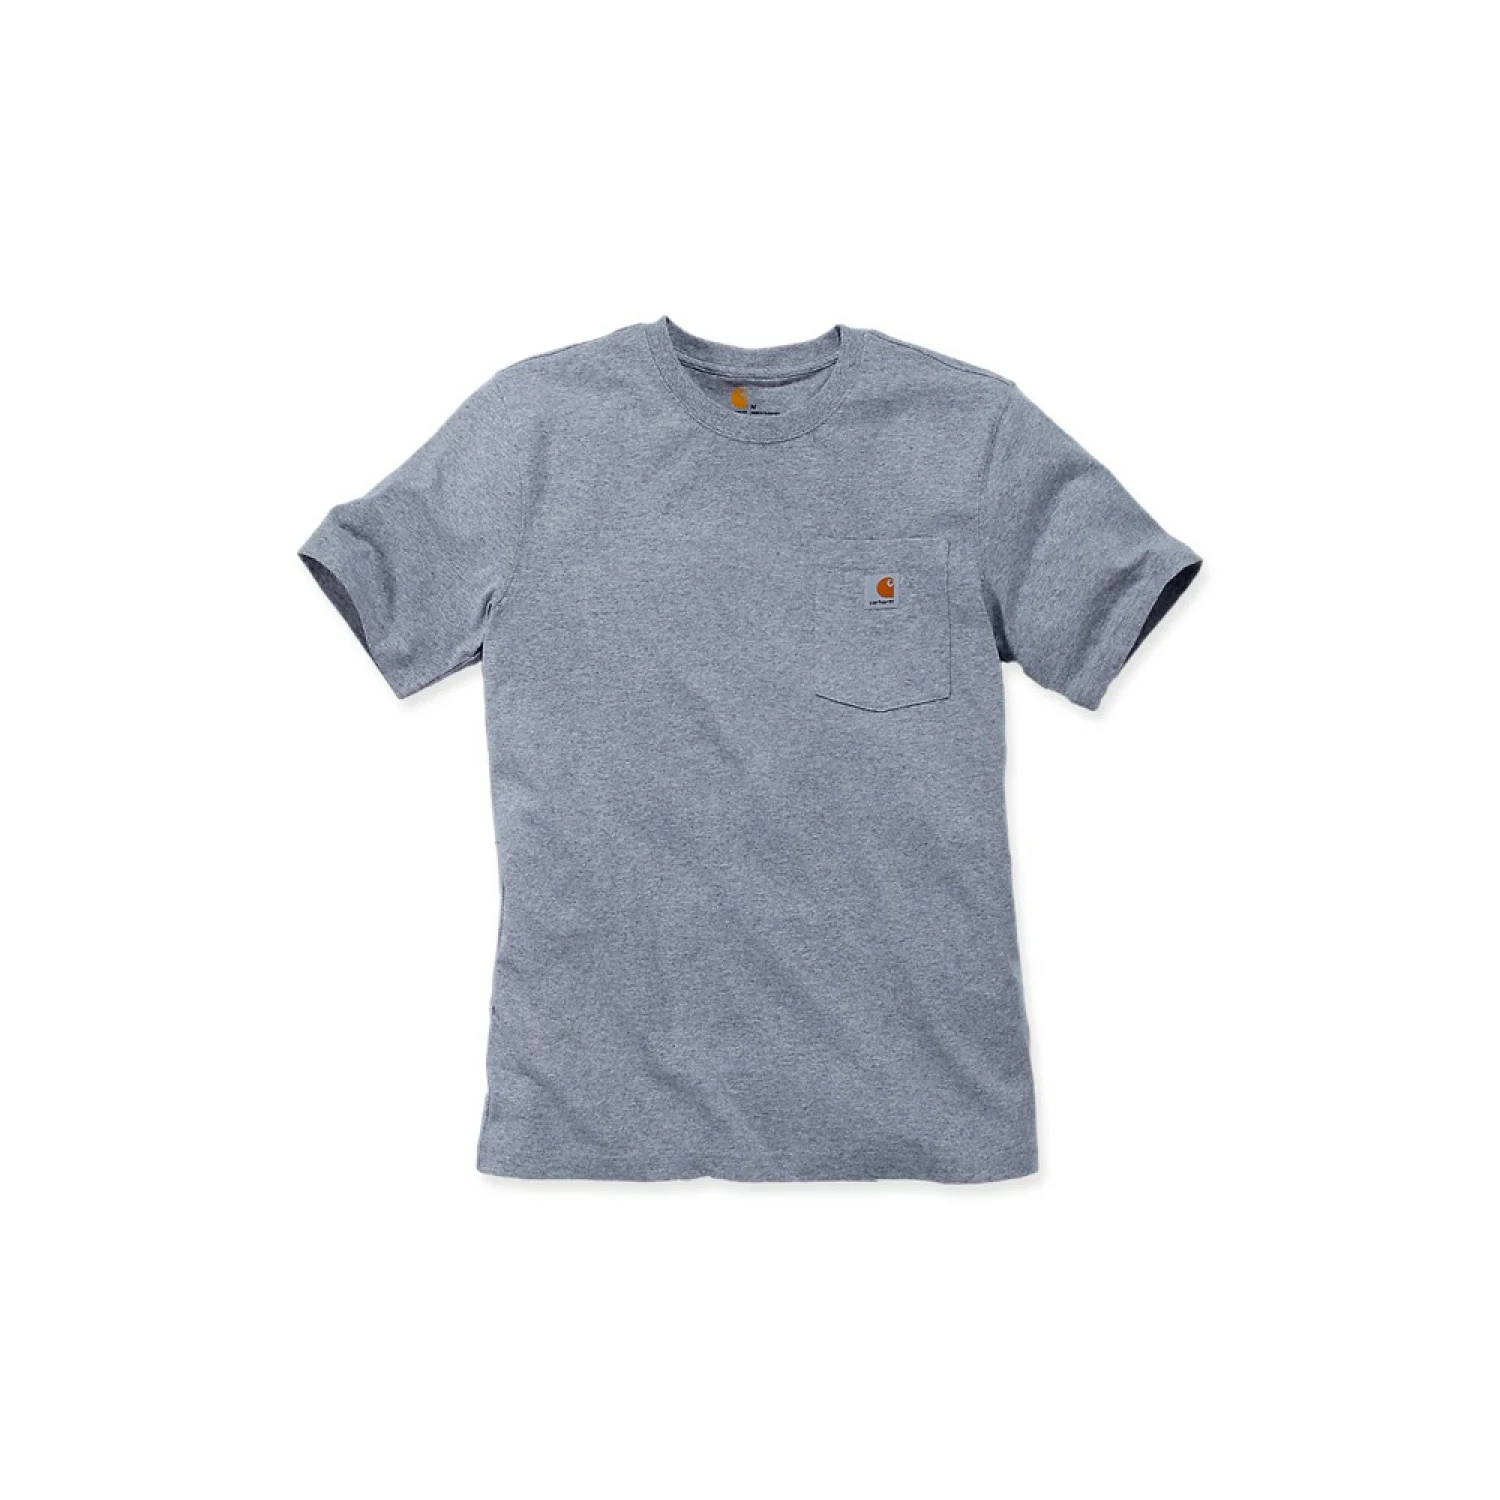 Carhartt 103296 Workwear Pocket T-Shirt - Relaxed Fit - Heather Grey - L